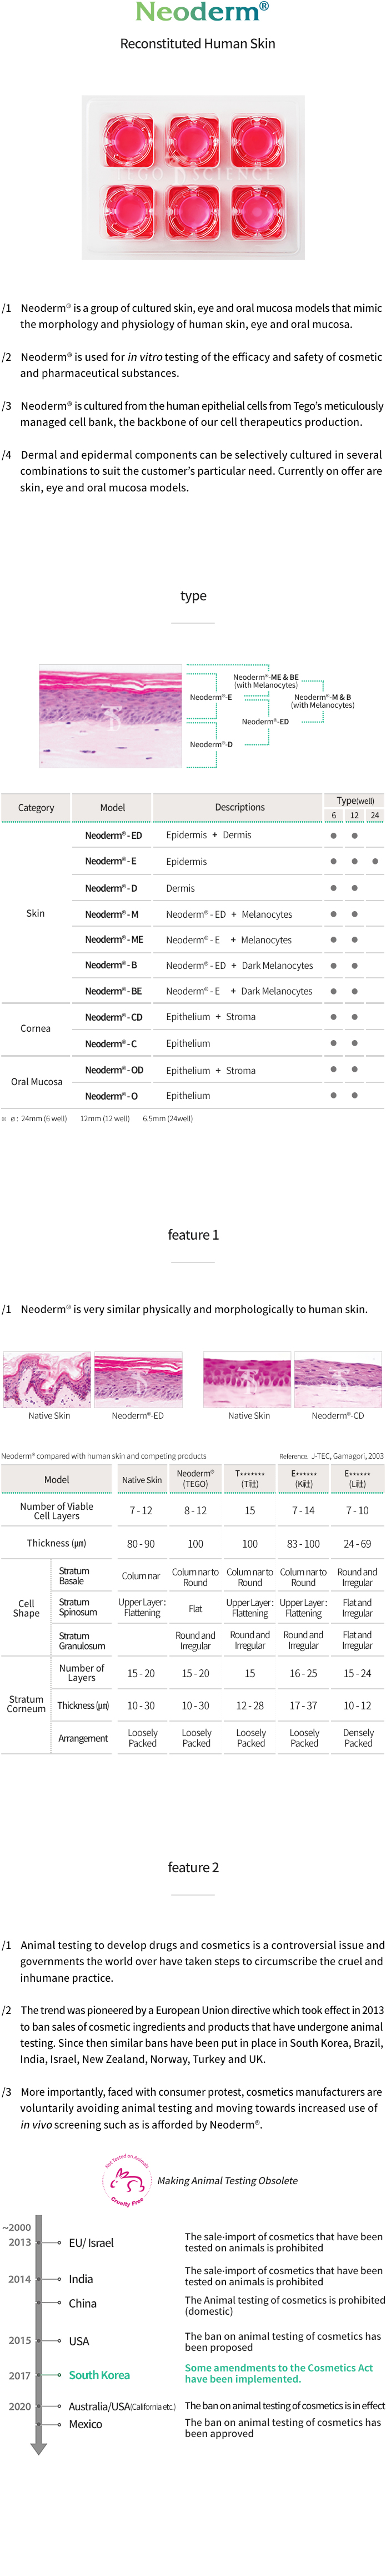 neoderm_overview_img